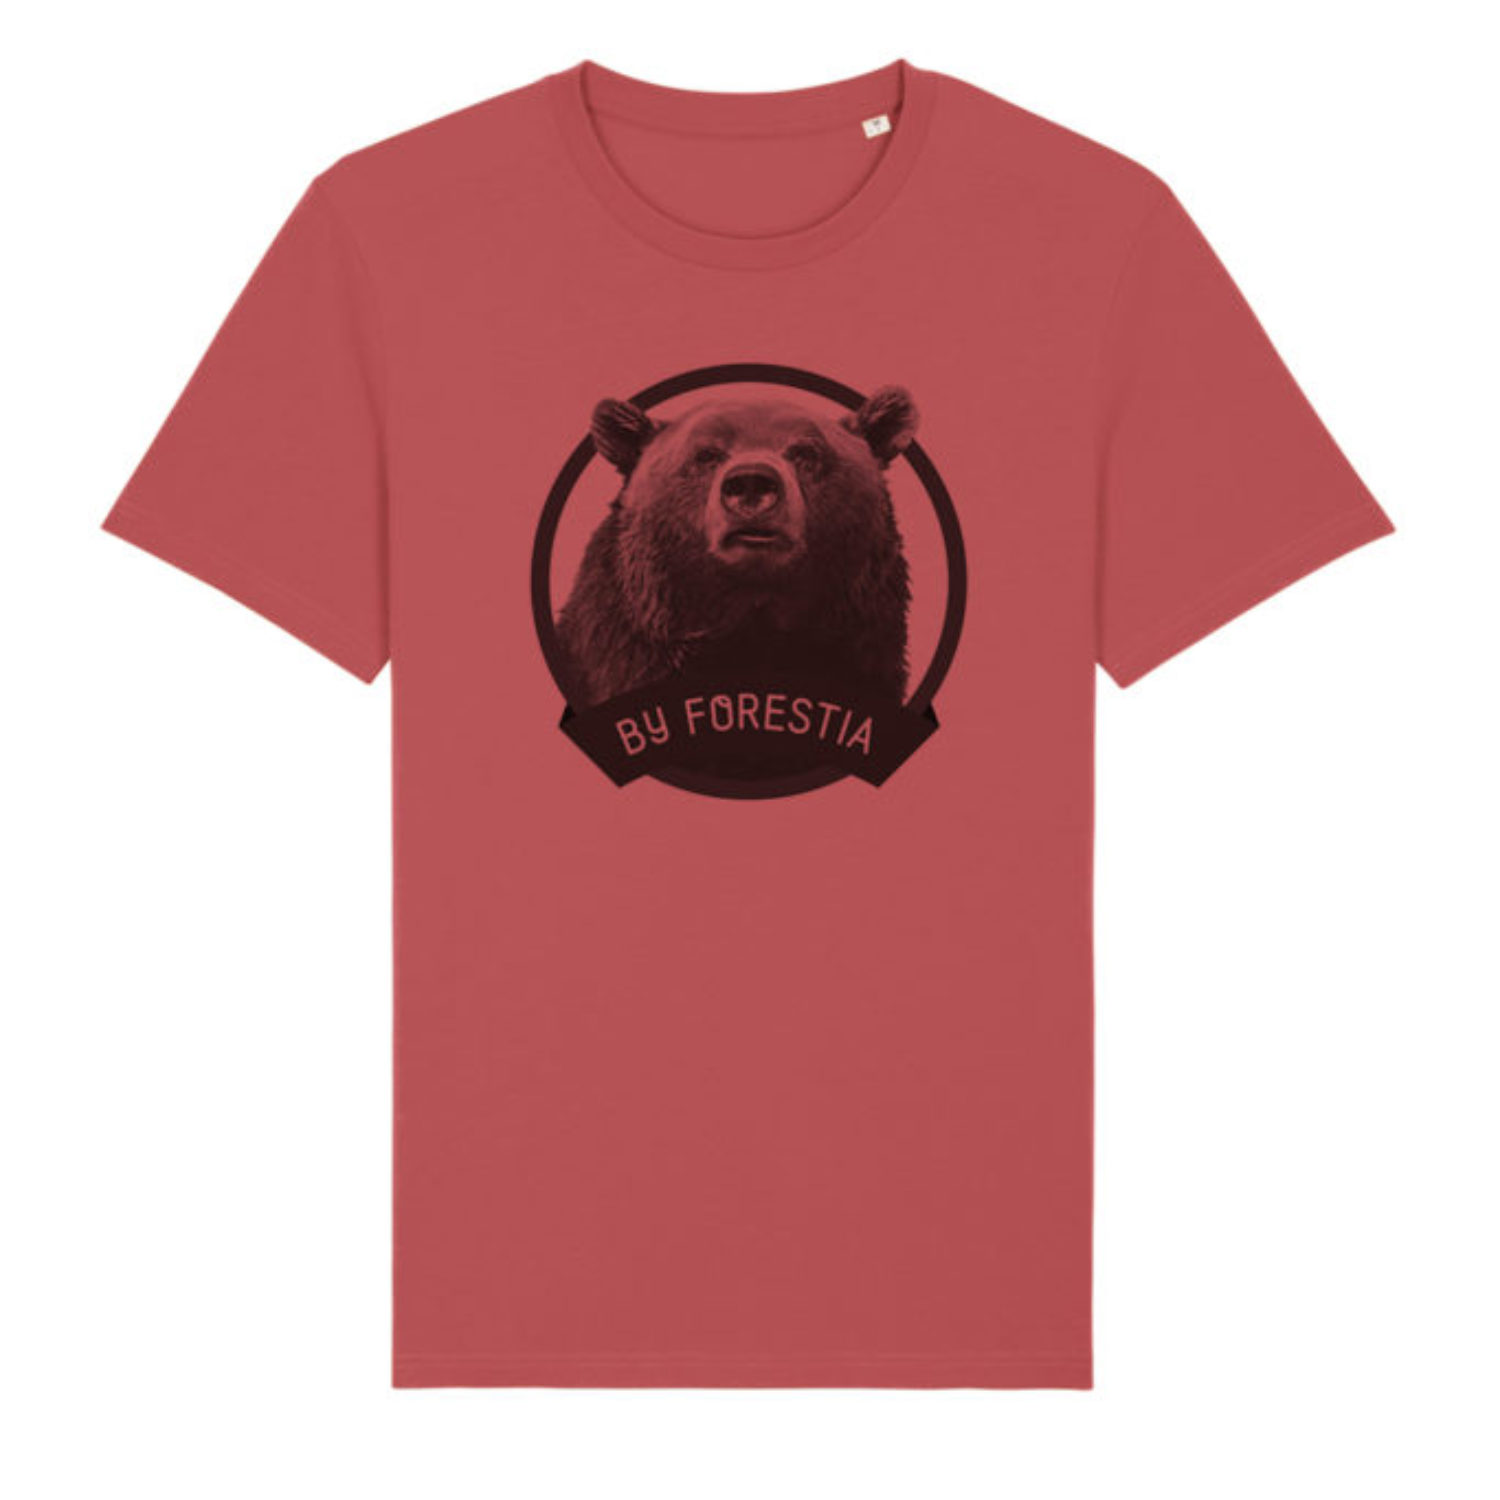 T-shirt adulte - Ours